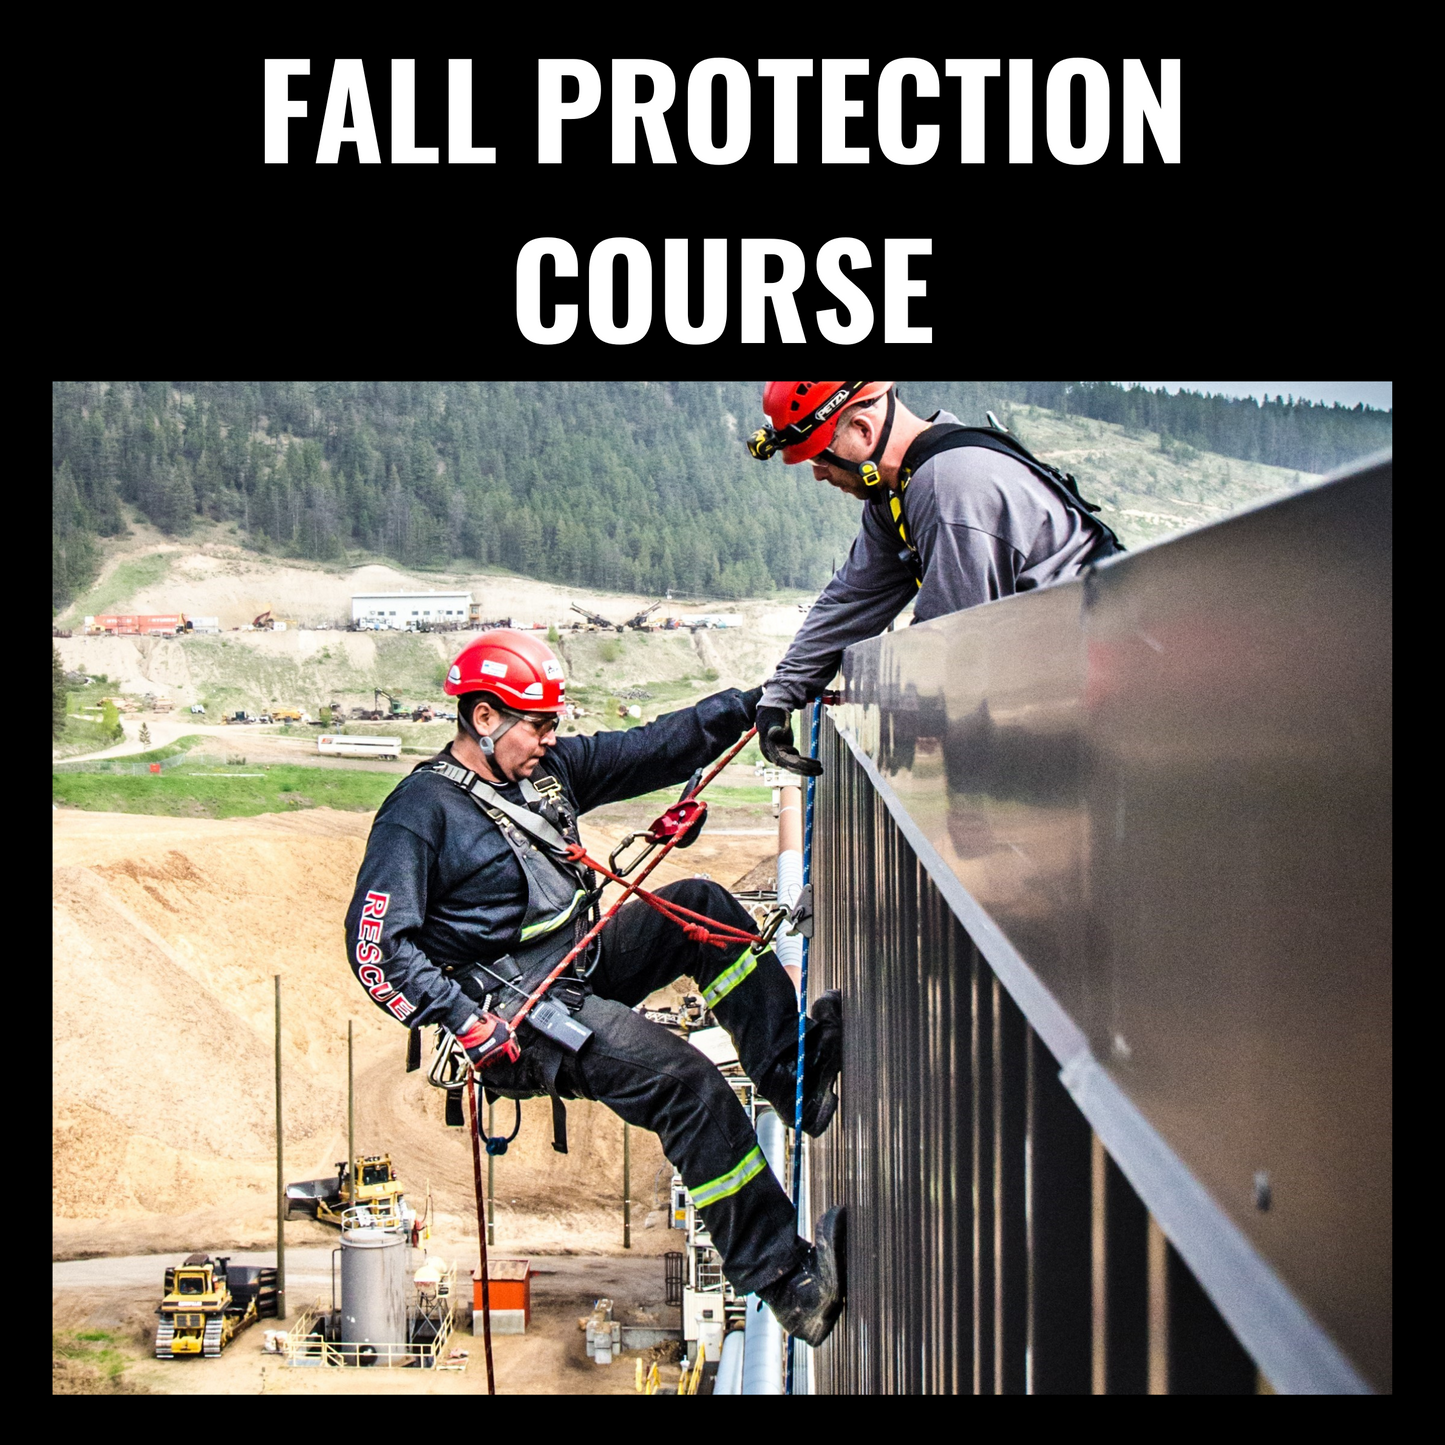 Fall Protection: Prince George, BC - October 23rd